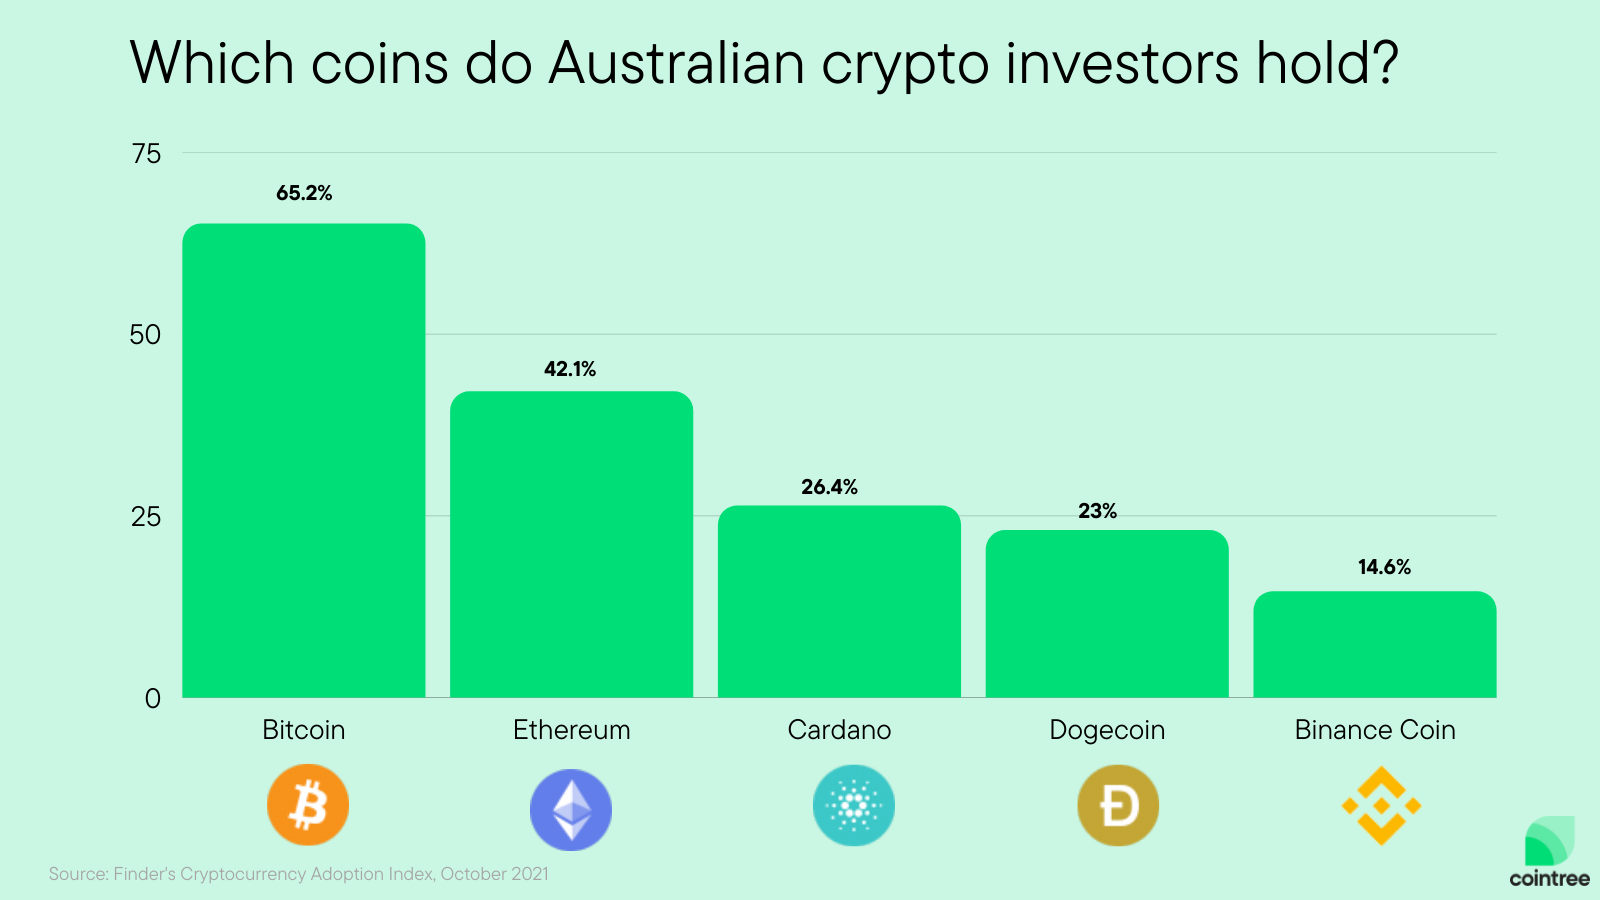 Bitcoin is Australia's most popular coin, while Dogecoin is the fourth favourite.